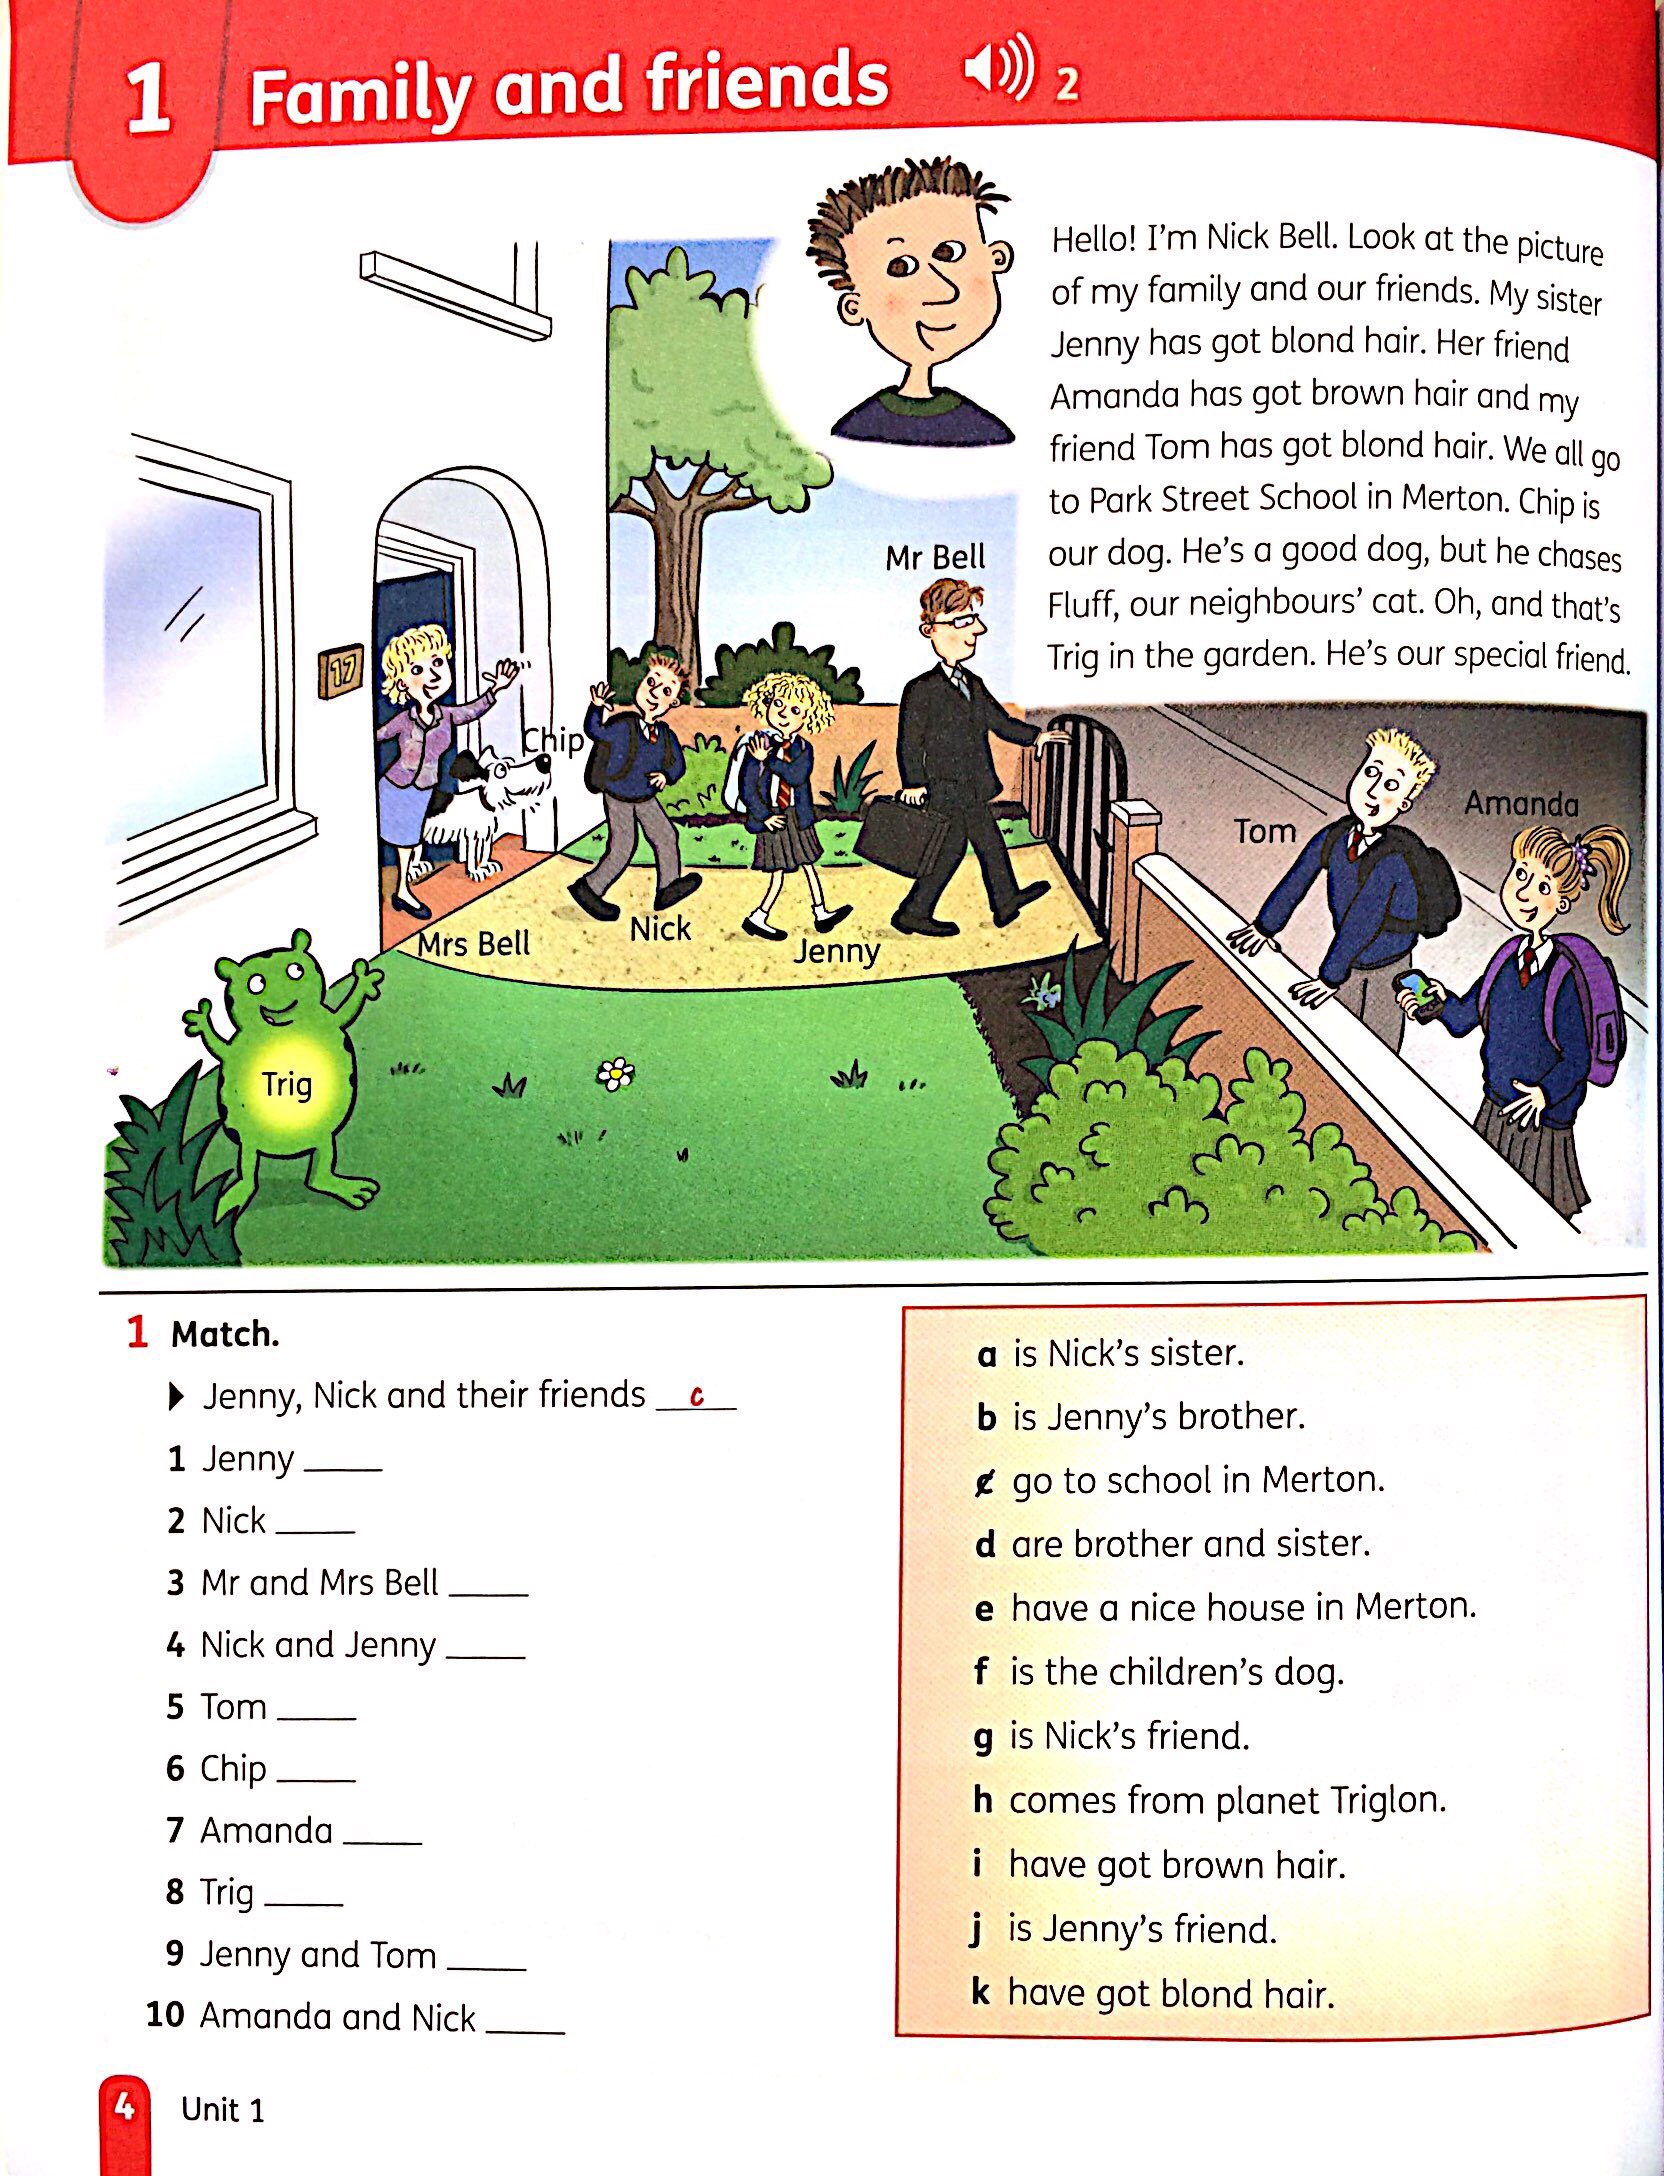 Grammar 1 Student’s Book with Audio CD 3Ed